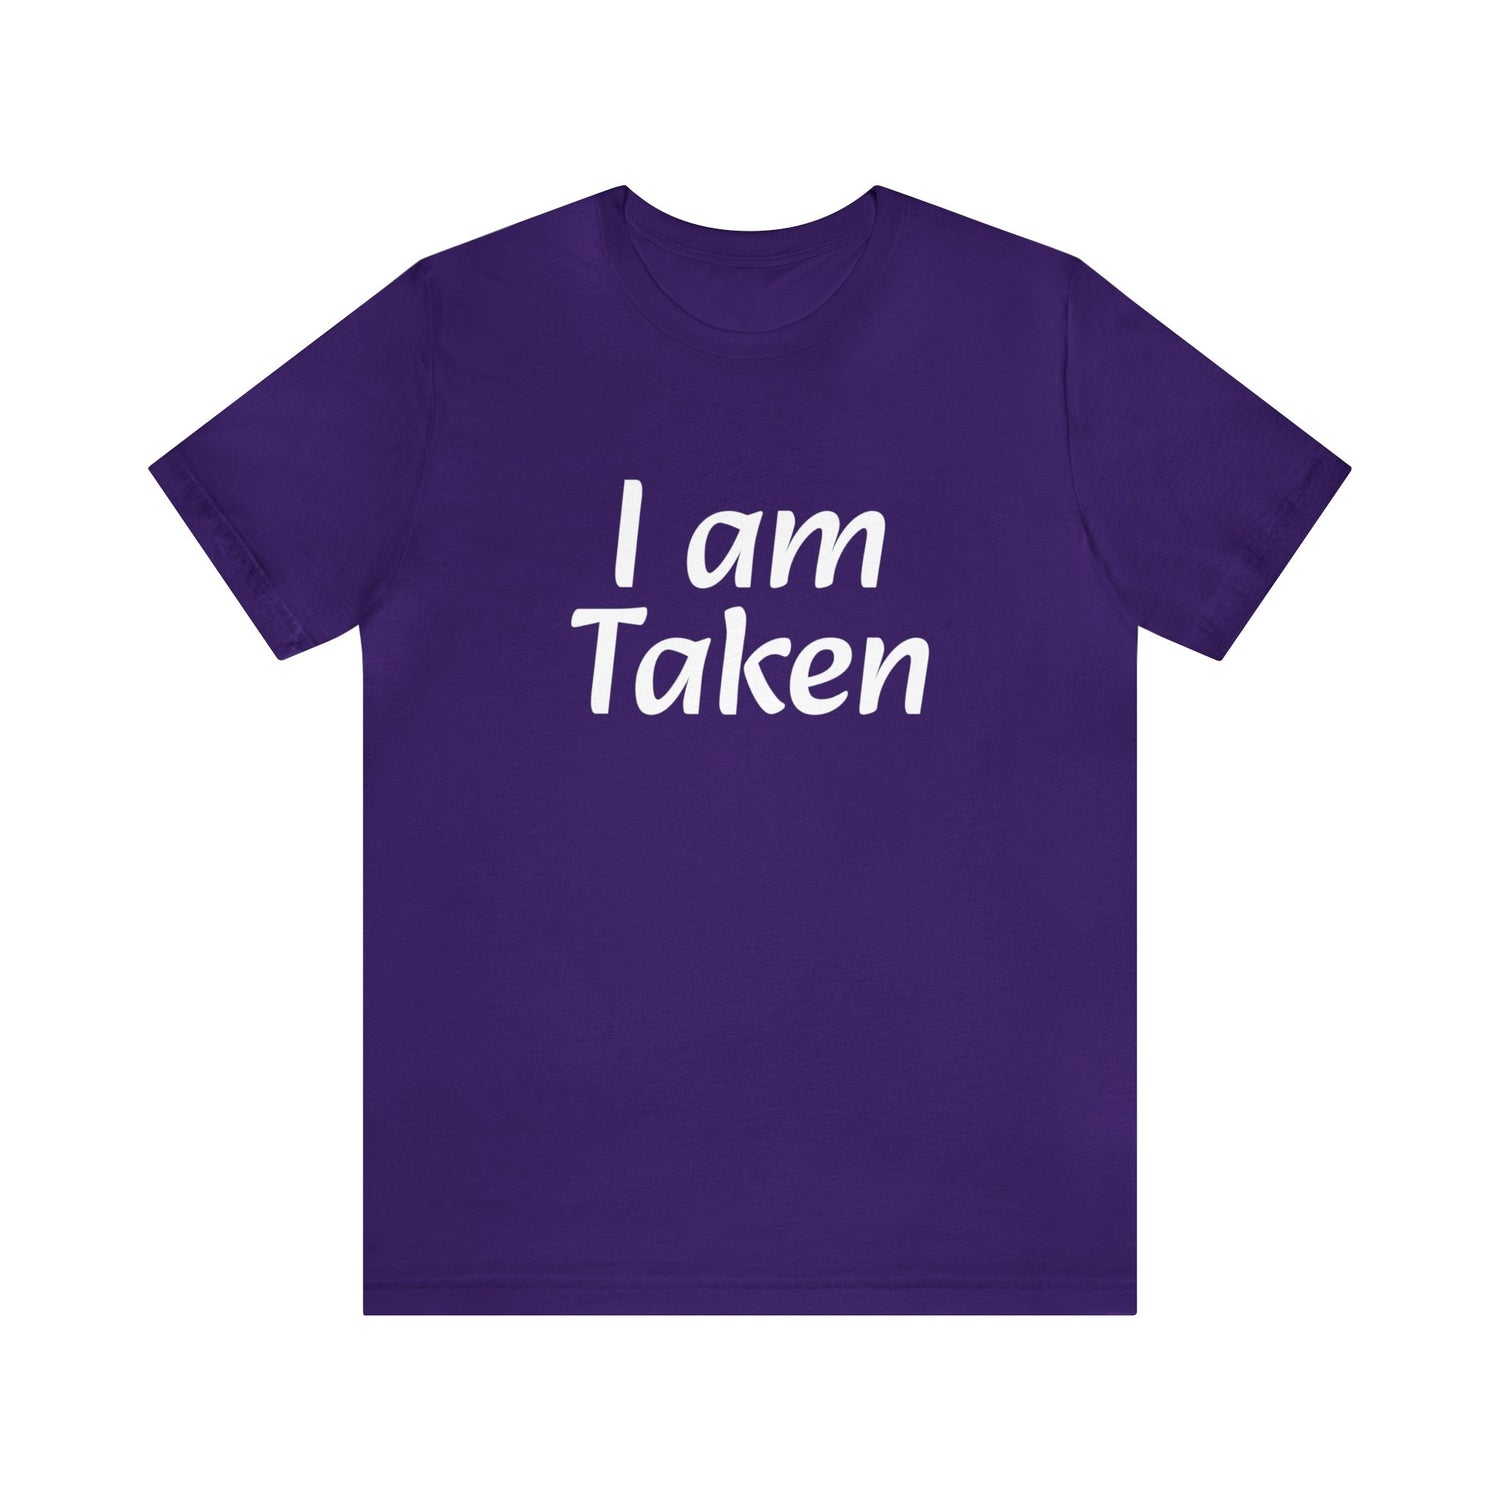 In Relationship T-Shirt | Couples T-Shirt | For Him or Her Team Purple T-Shirt Petrova Designs